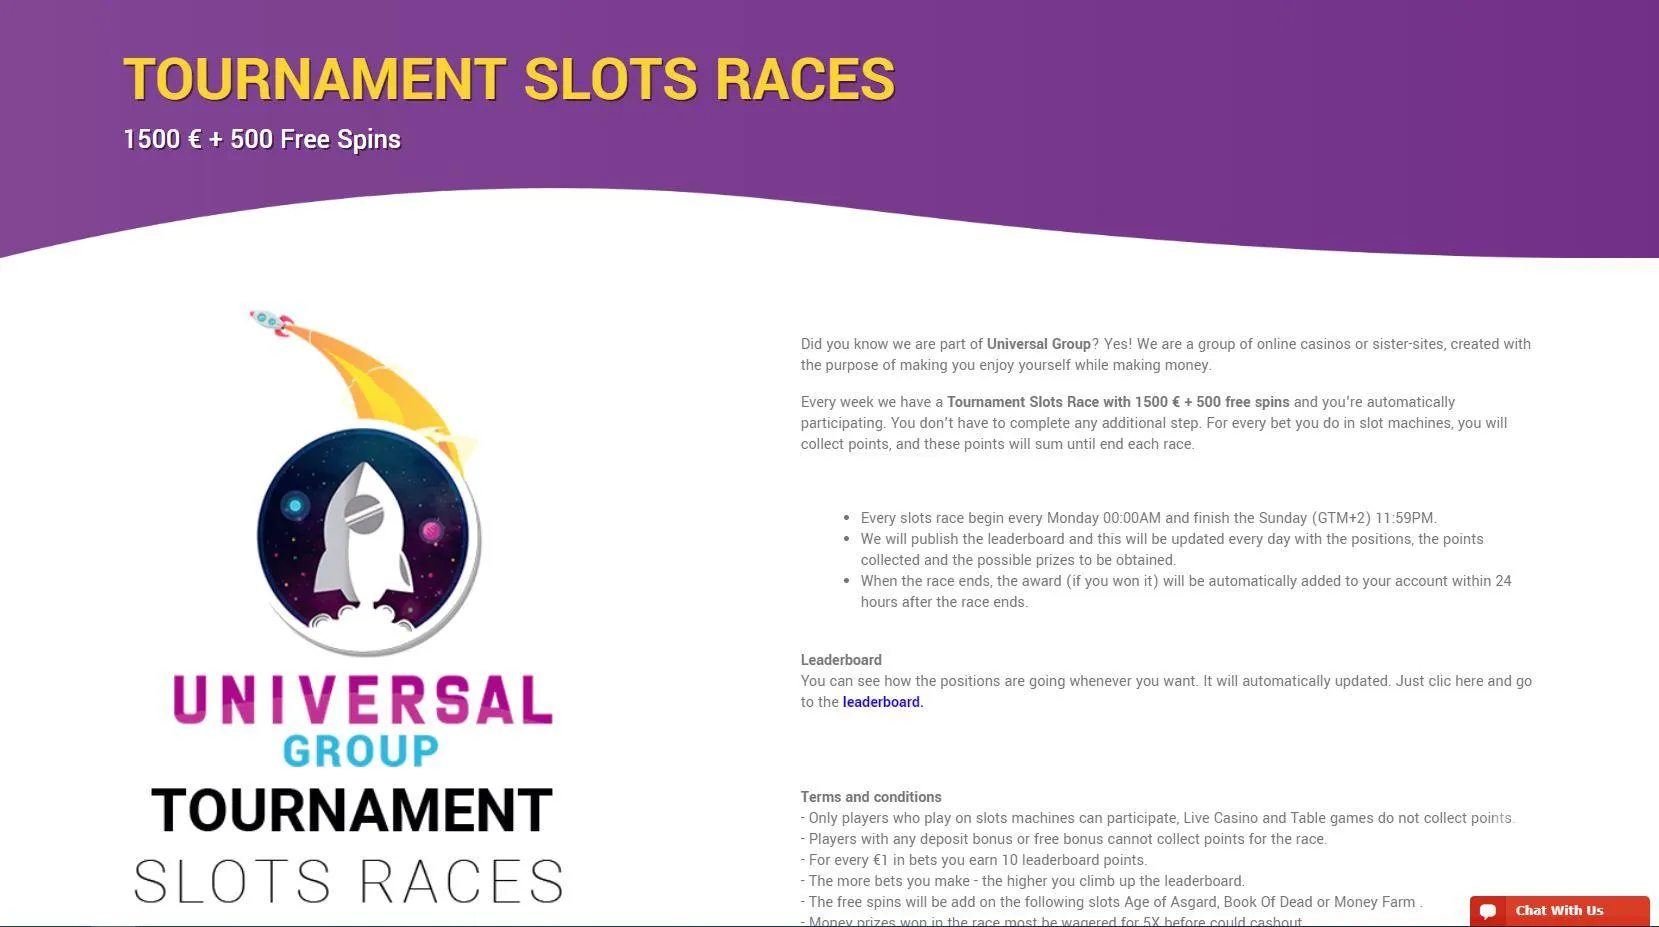 wills casino tournament slot races online casino tournaments leaderboard free spins